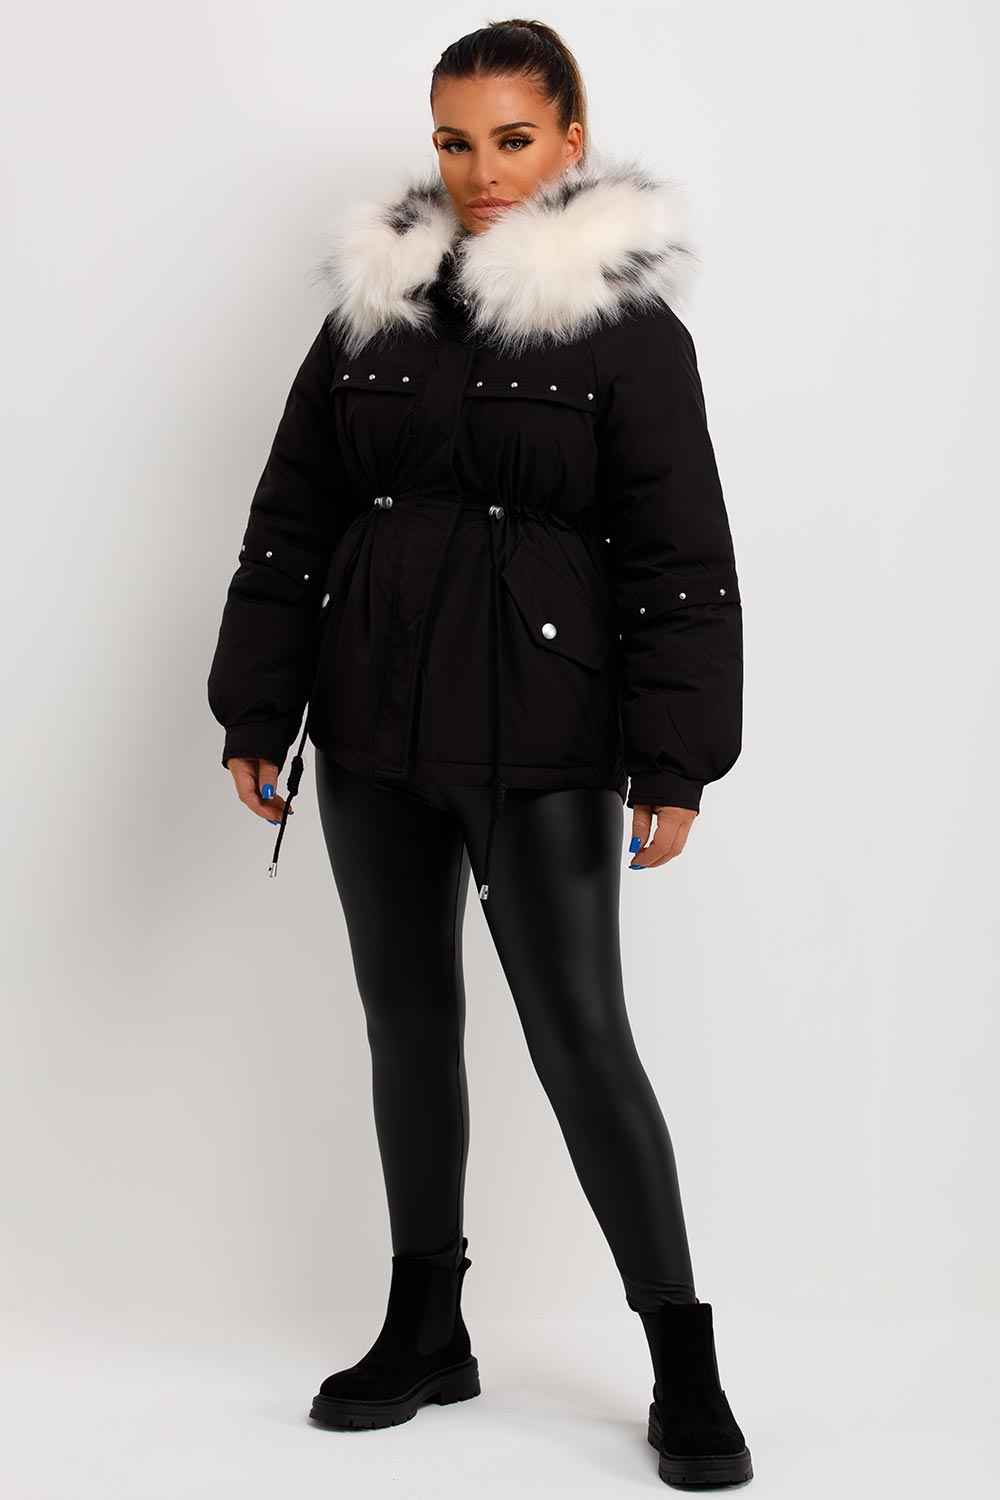 womens fur hood parka coat with studs and drawstring waist sale uk outerwear